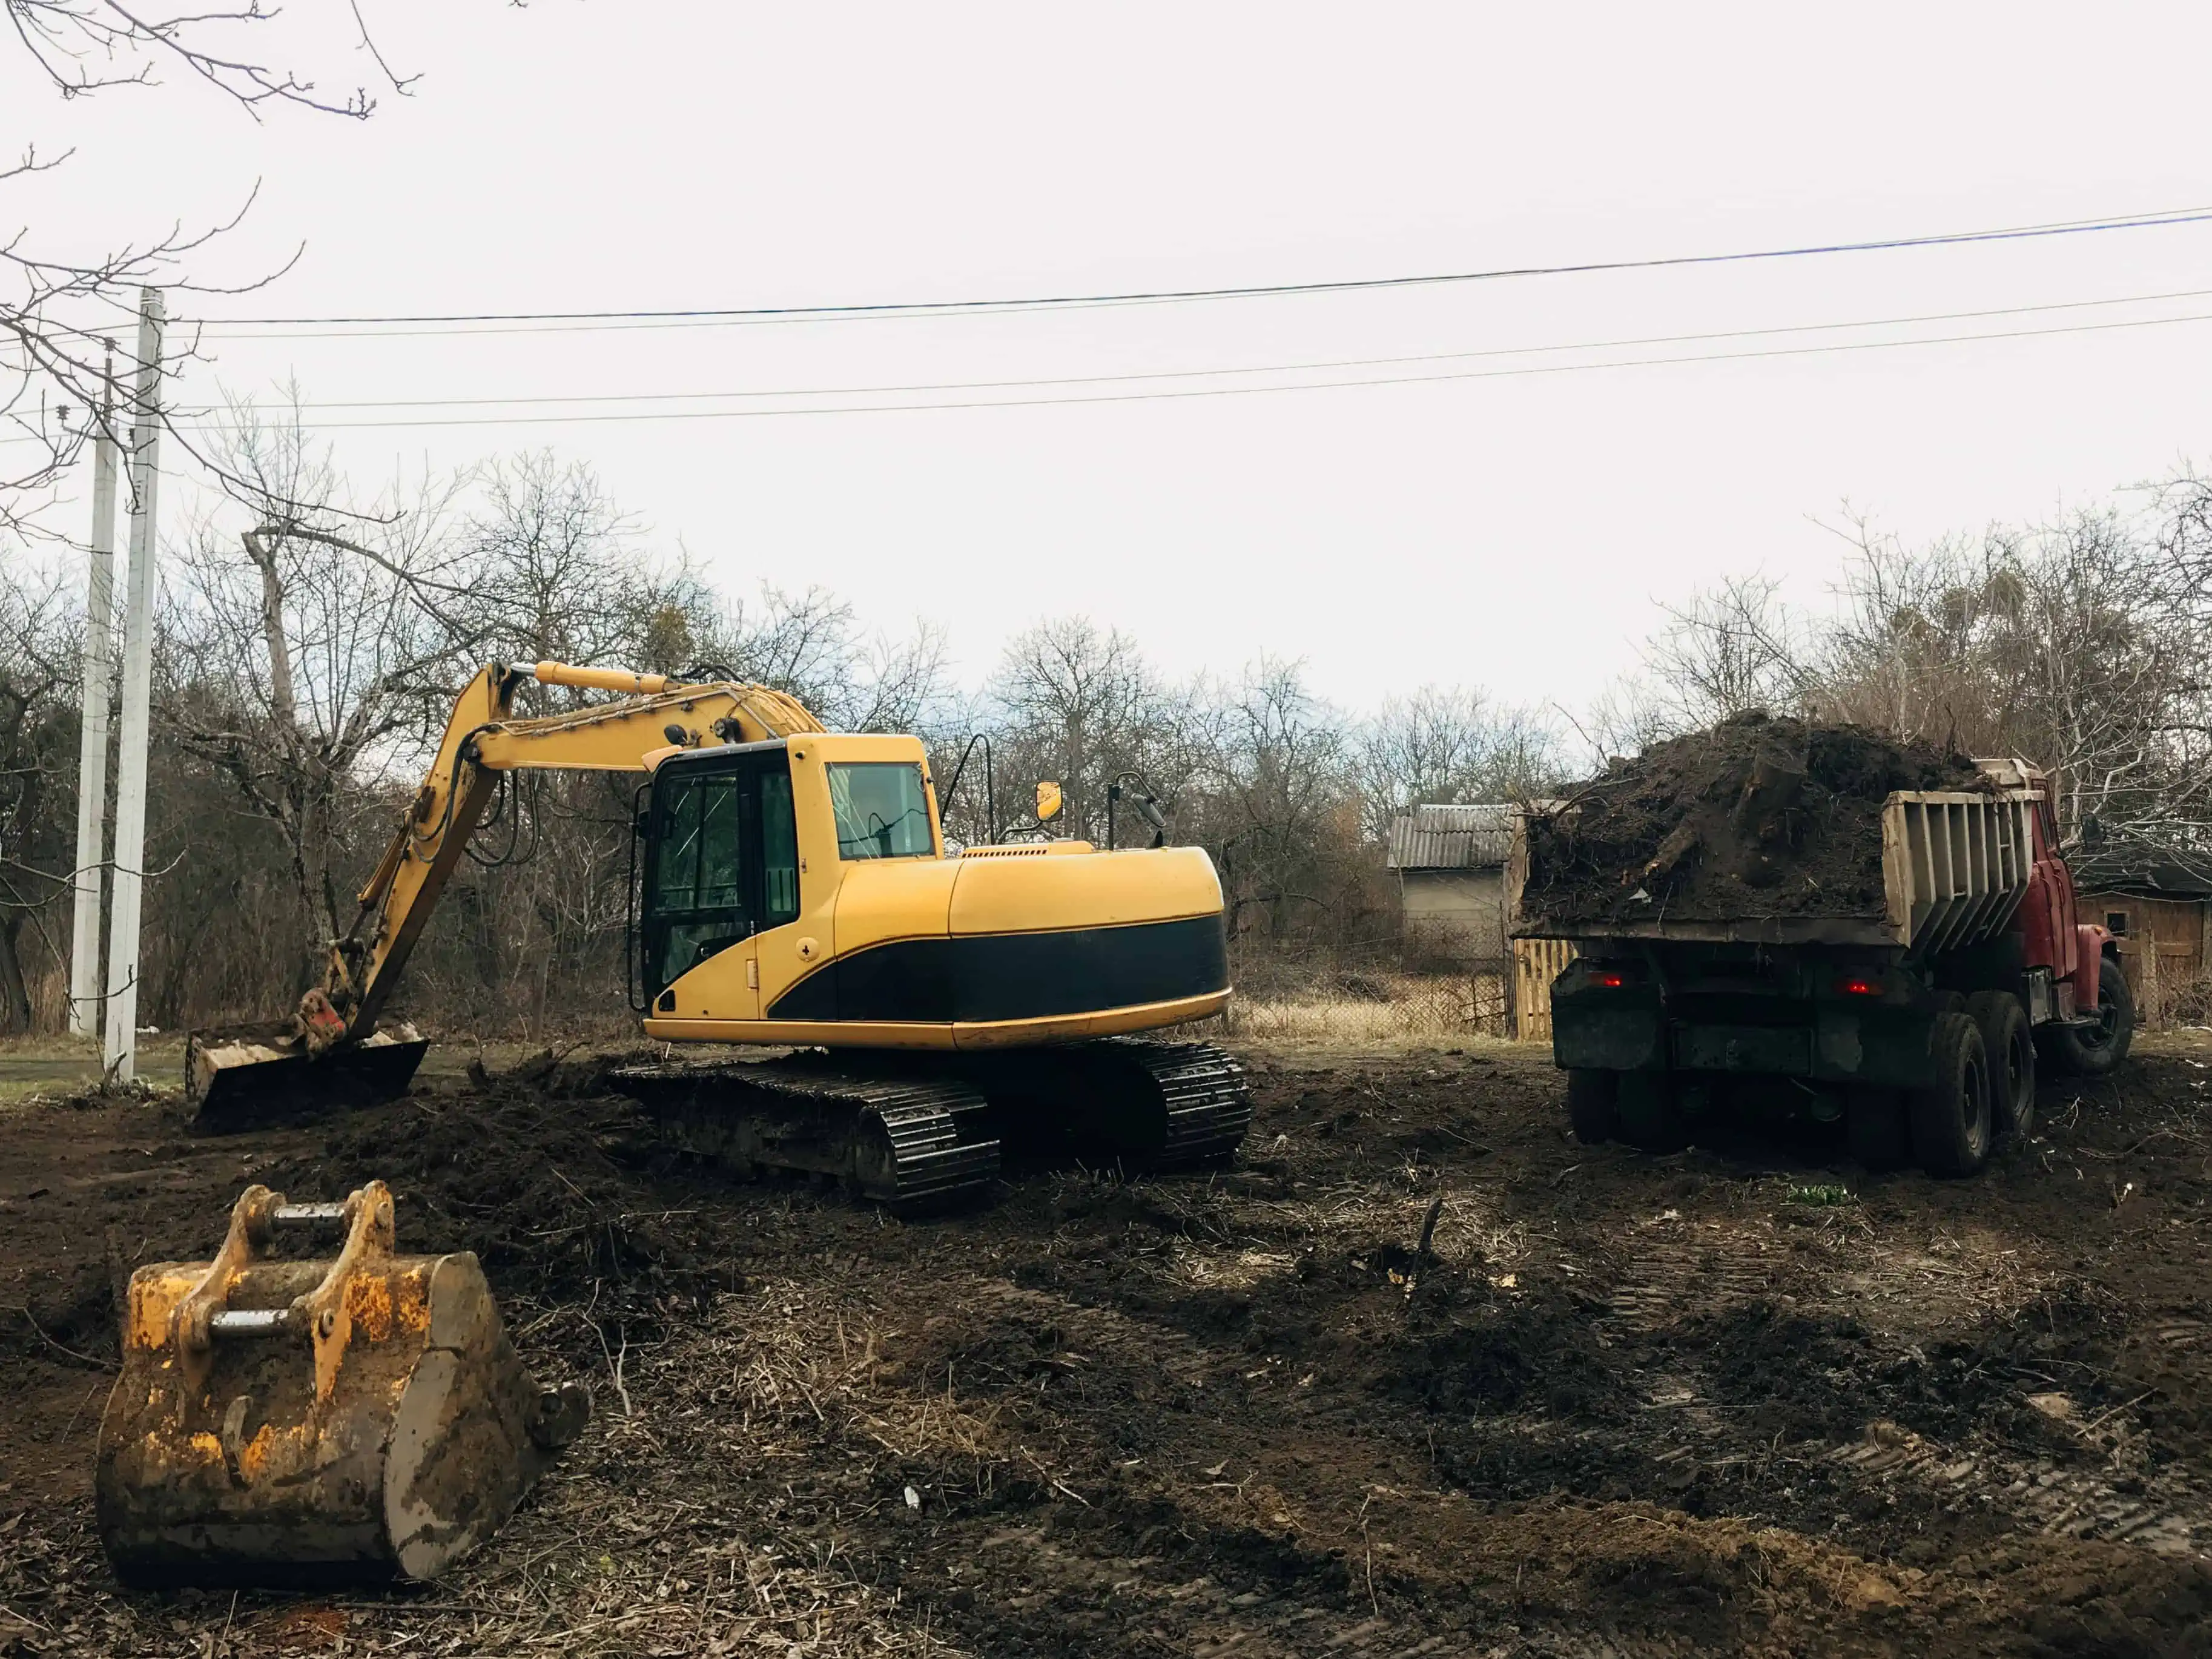 Bulldozer clearing land from old trees, roots and branches with dirt and trash